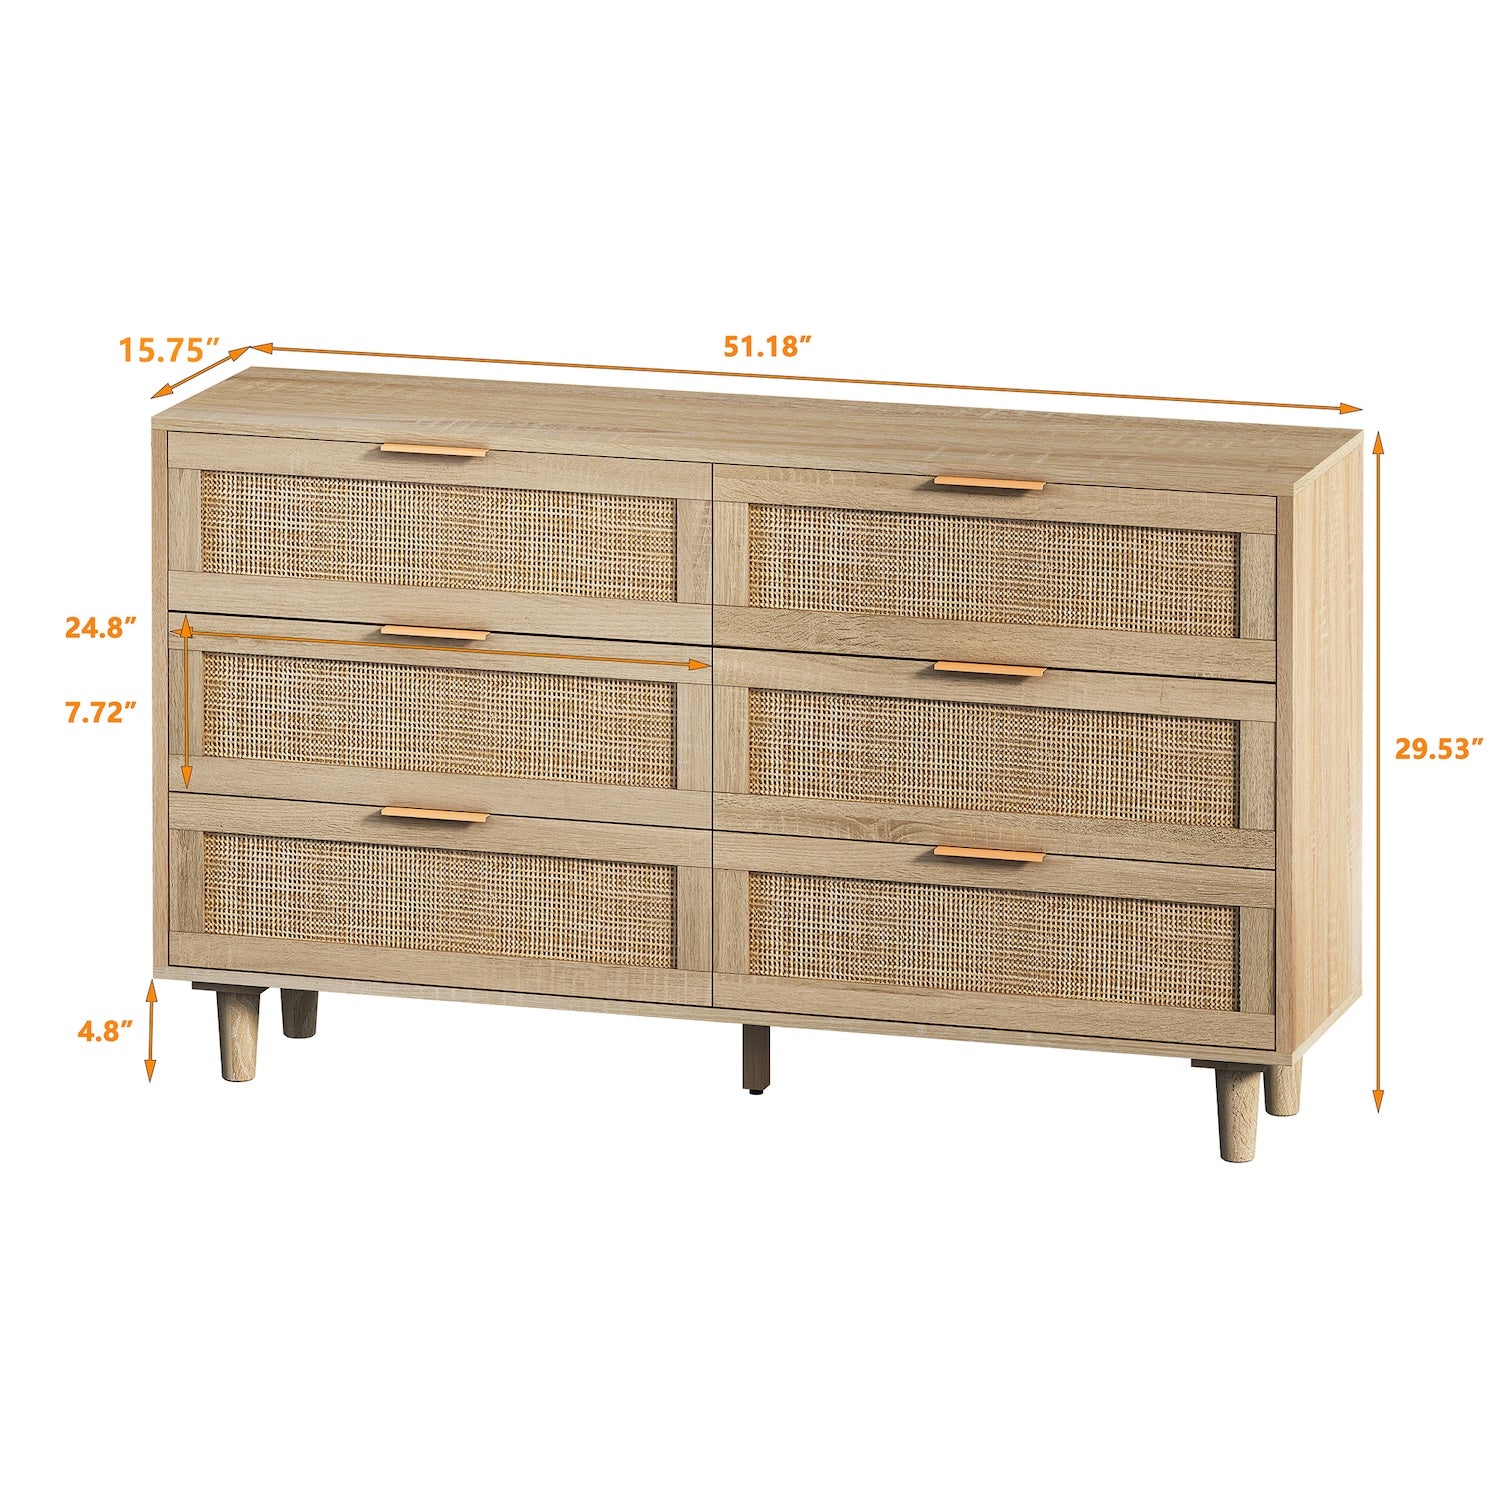 Danita 6-Drawer Dresser in Natural Finish with Rattan Drawer Fronts